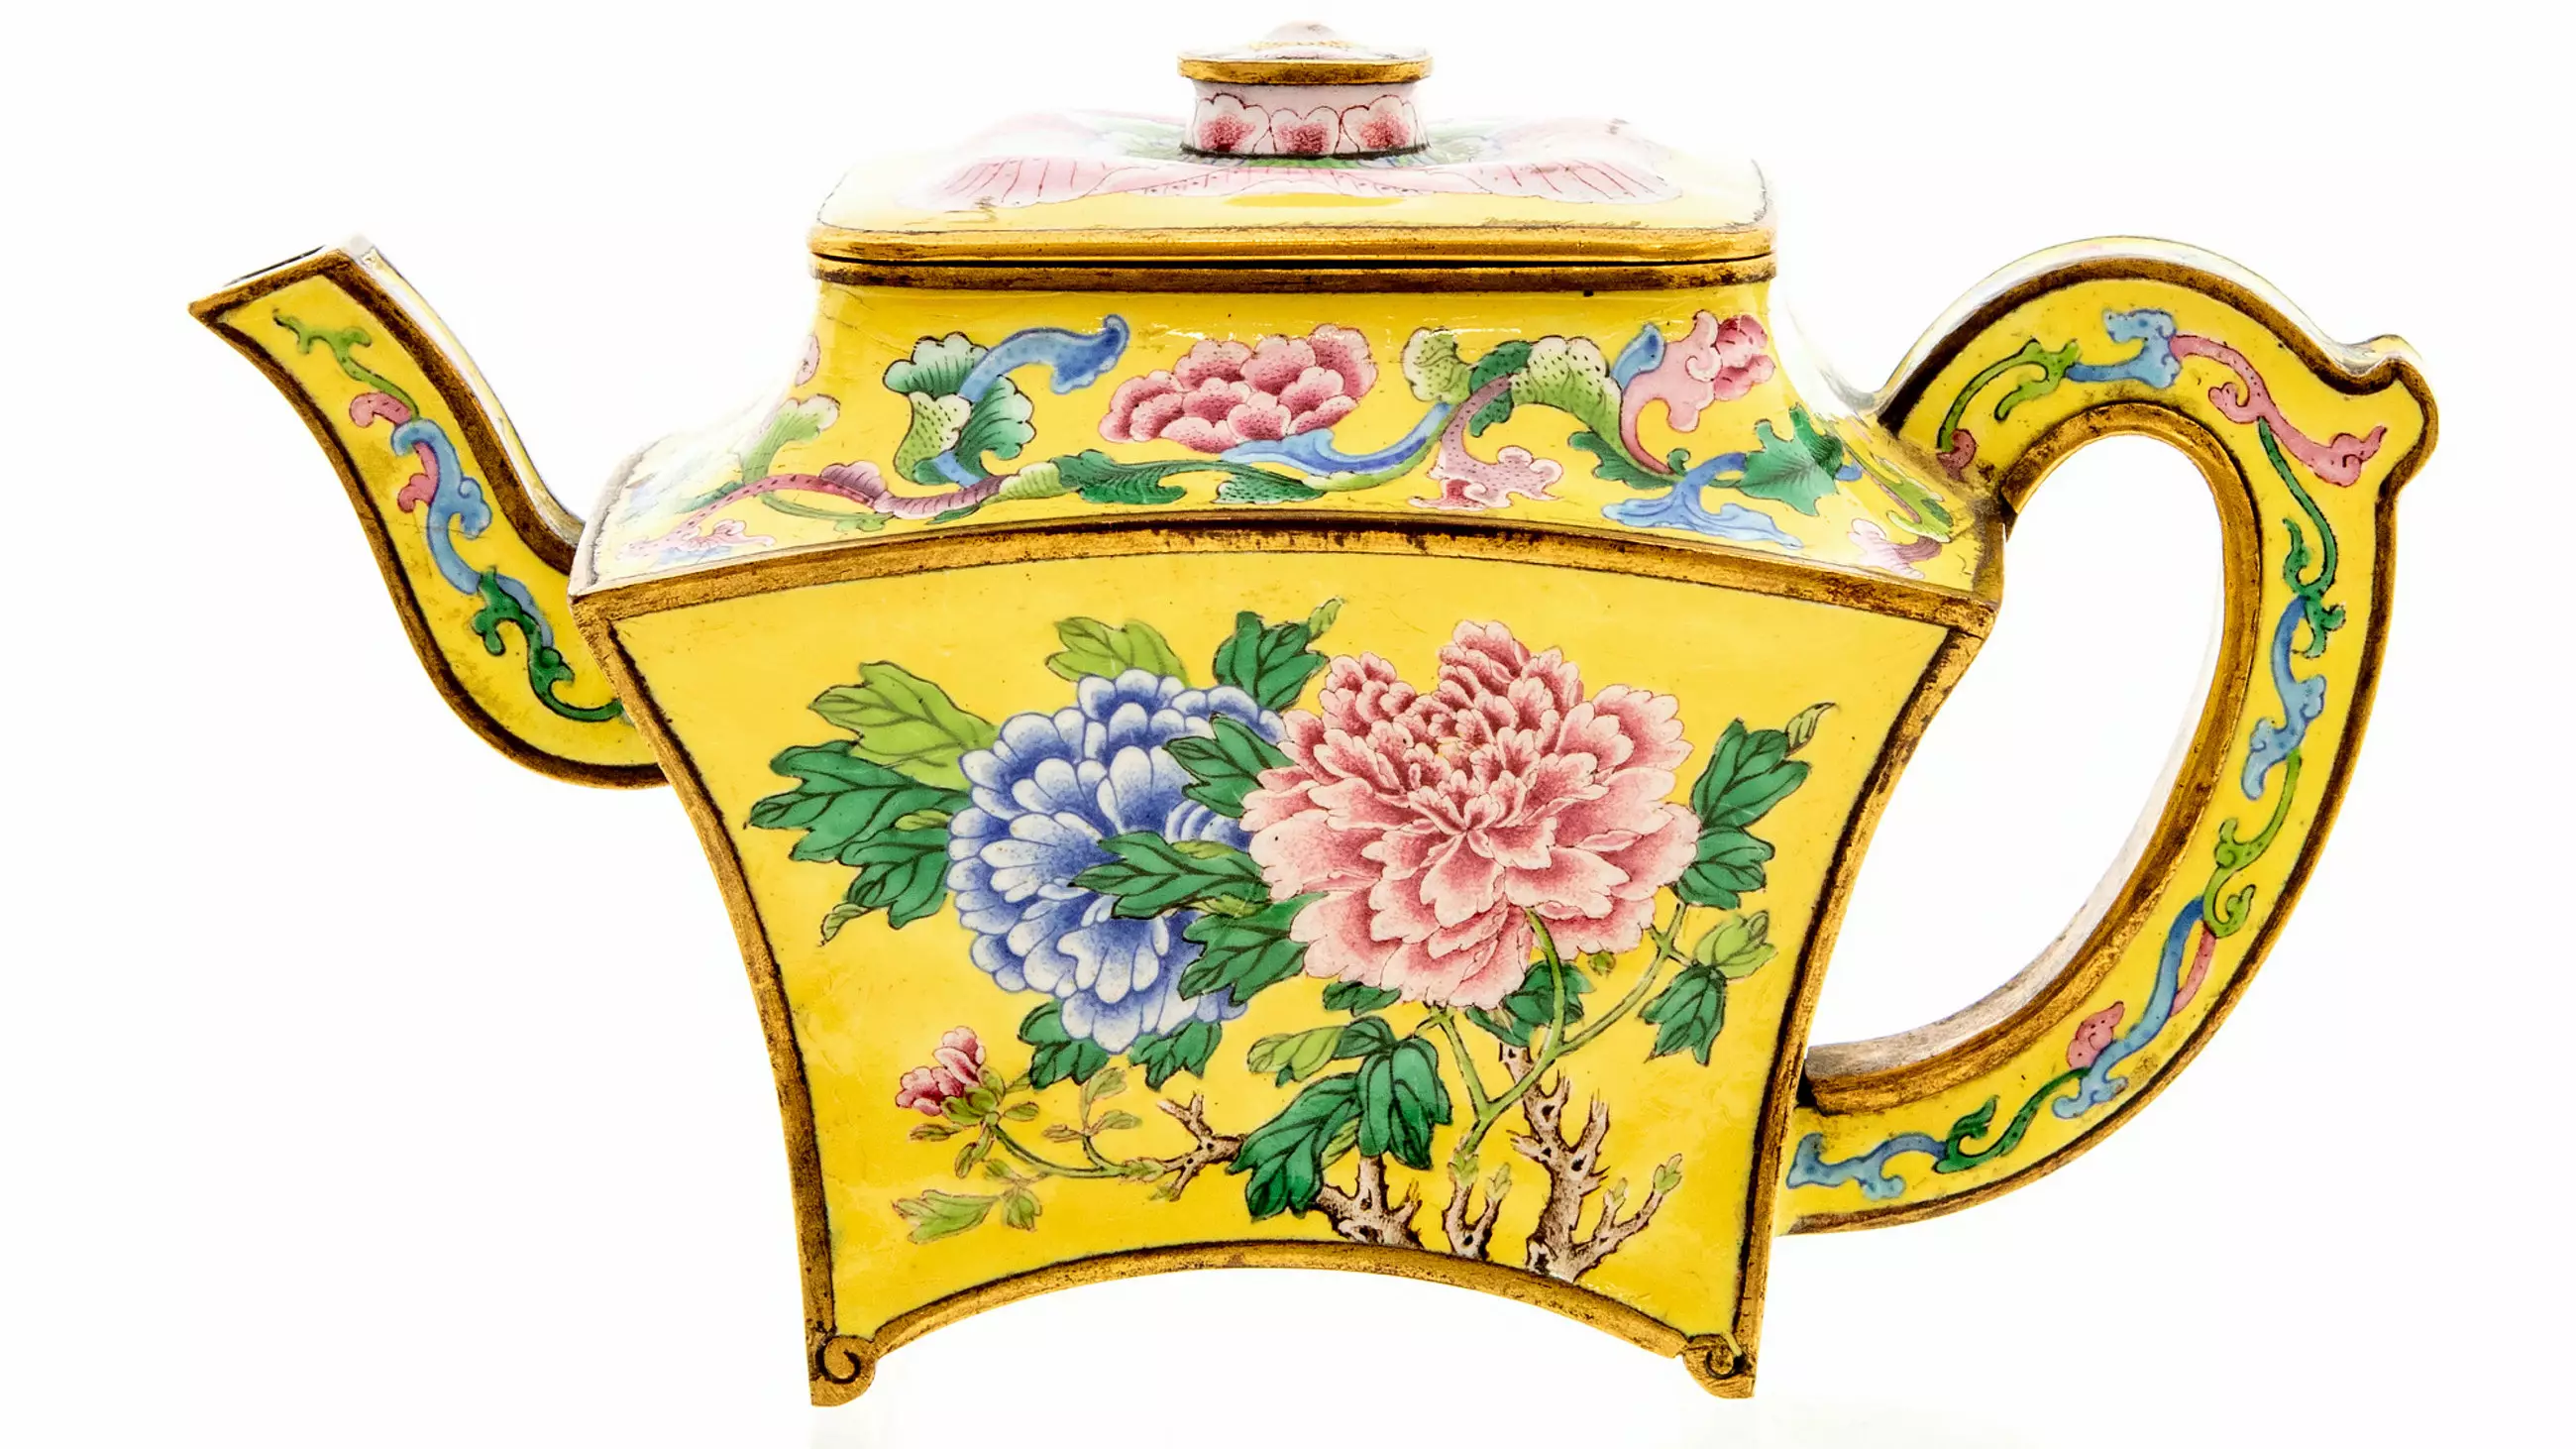 Man Finds Antique Teapot Worth £100,000 While Clearing Out Loft